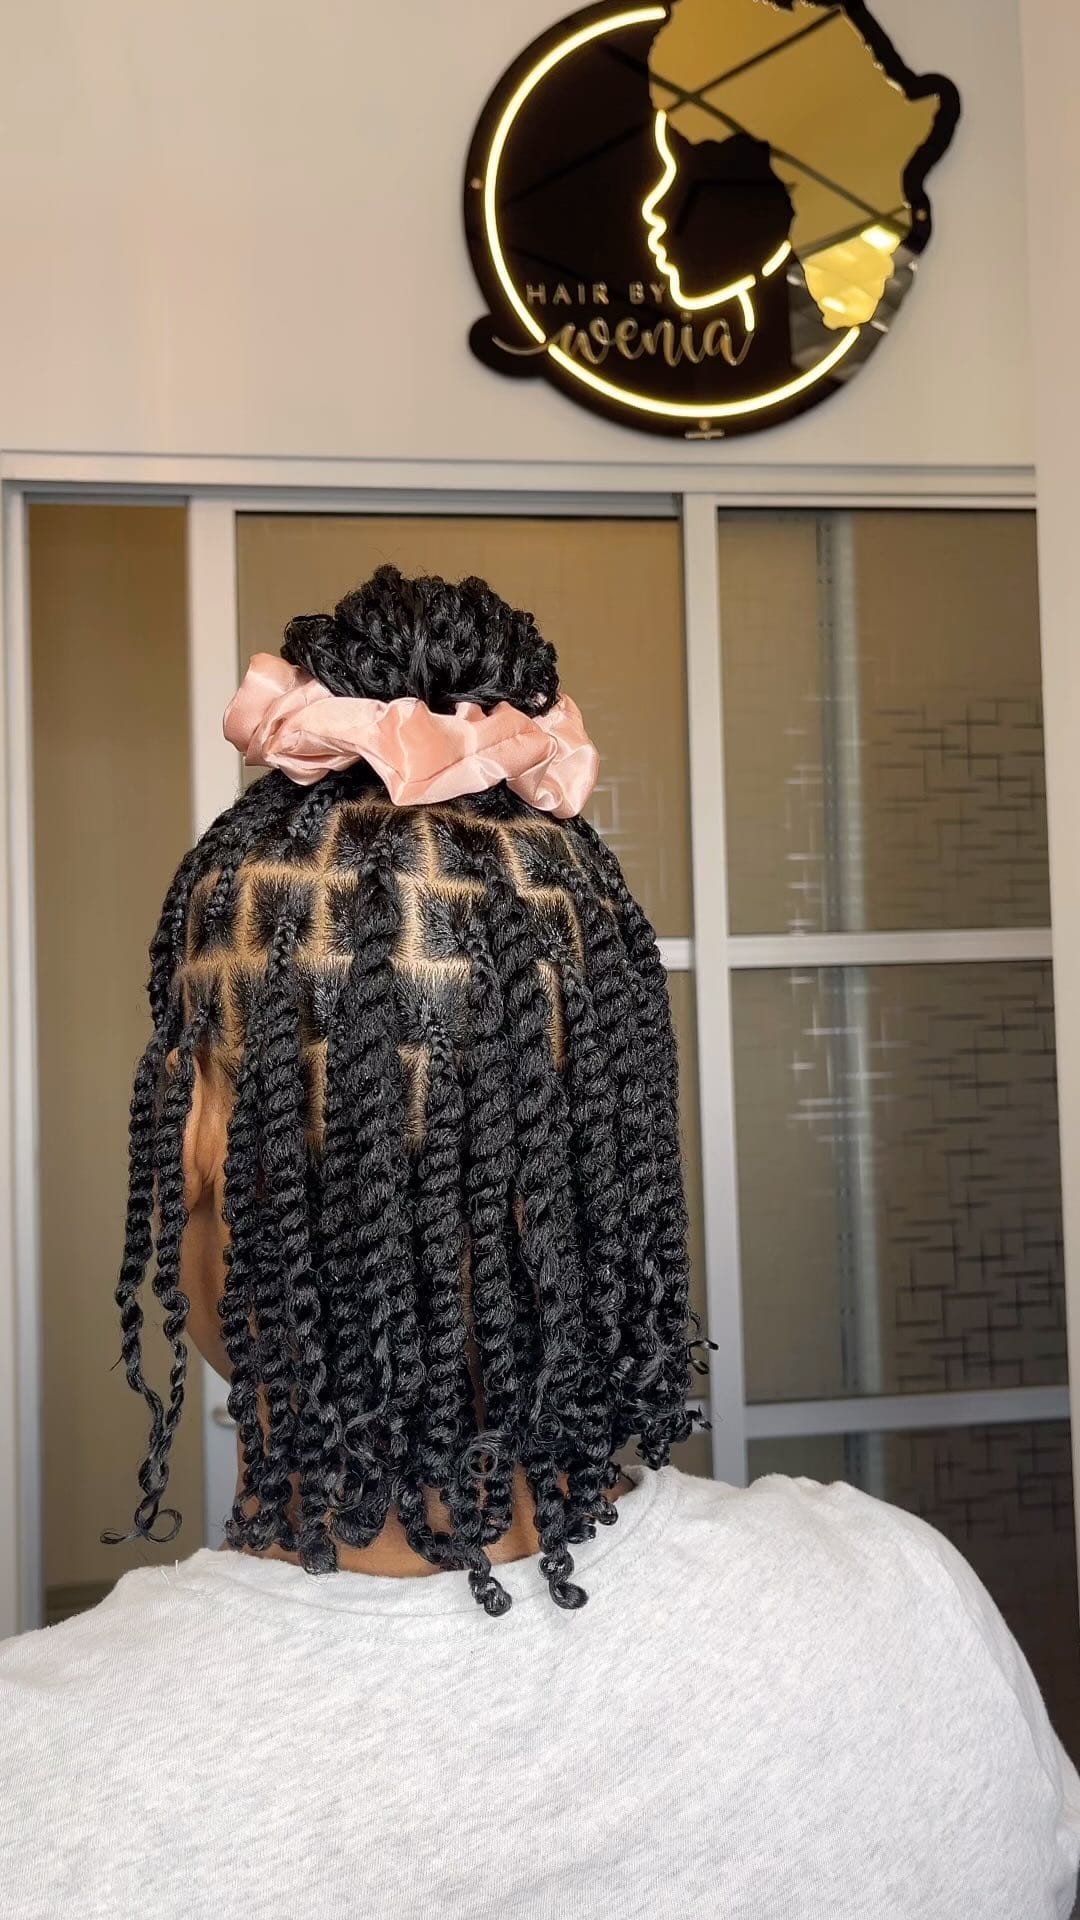 Kinky twists in an elegant updo topped with a peach scrunchie